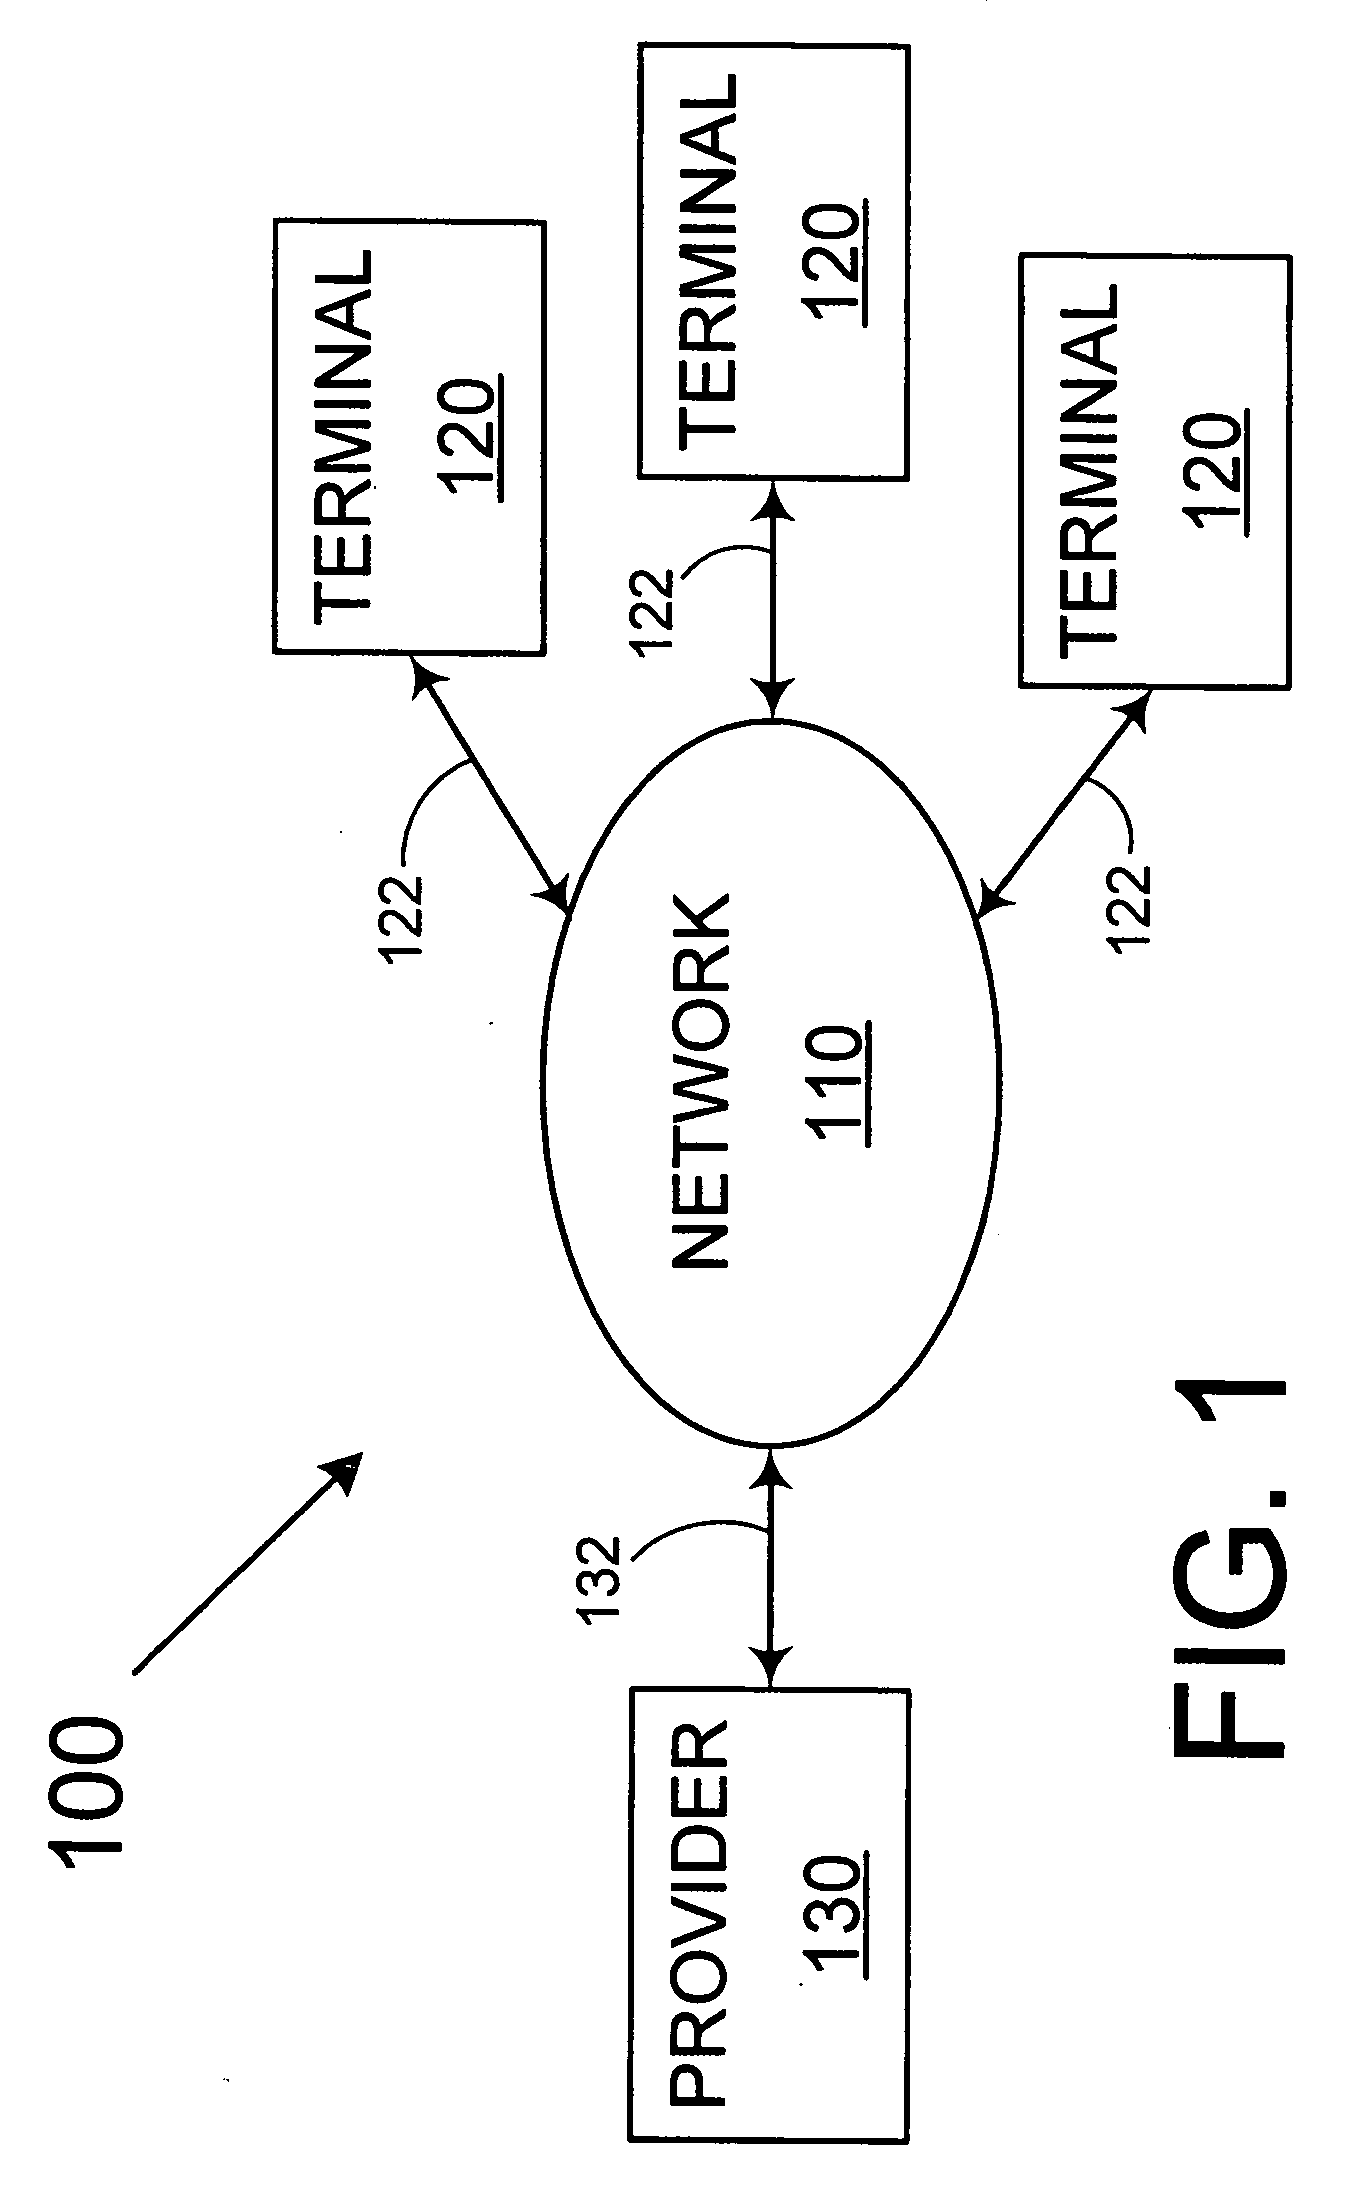 Automatic evaluation system using specialized communications interfaces